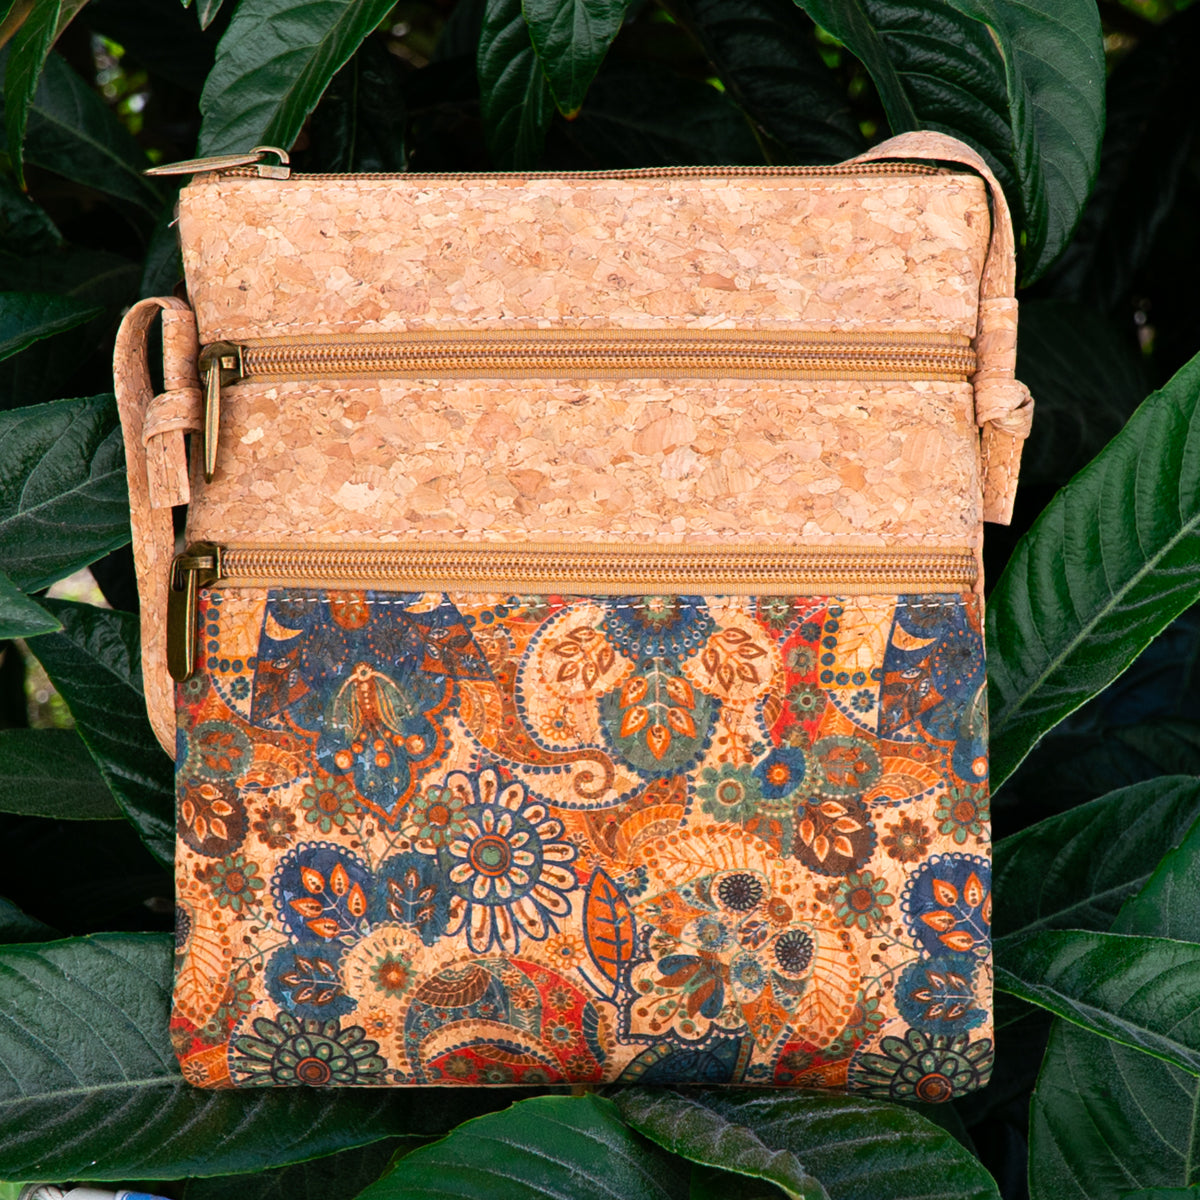 Natural Cork w/ Patterned Double Zipper Crossbody Bag | THE CORK COLLECTION